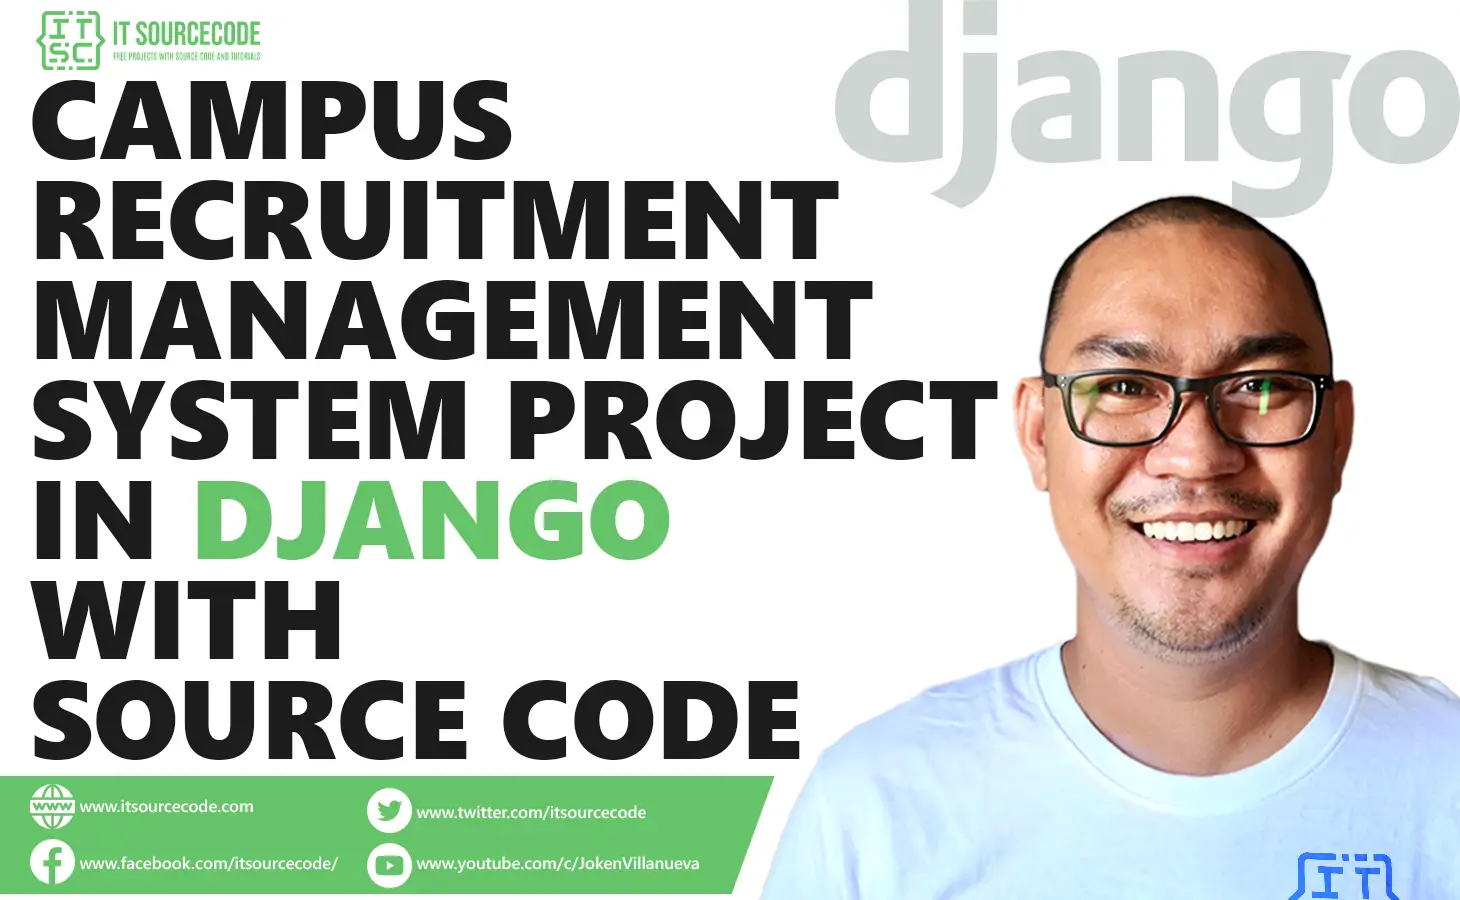 Campus Recruitment Management System Project in Django with Source Code